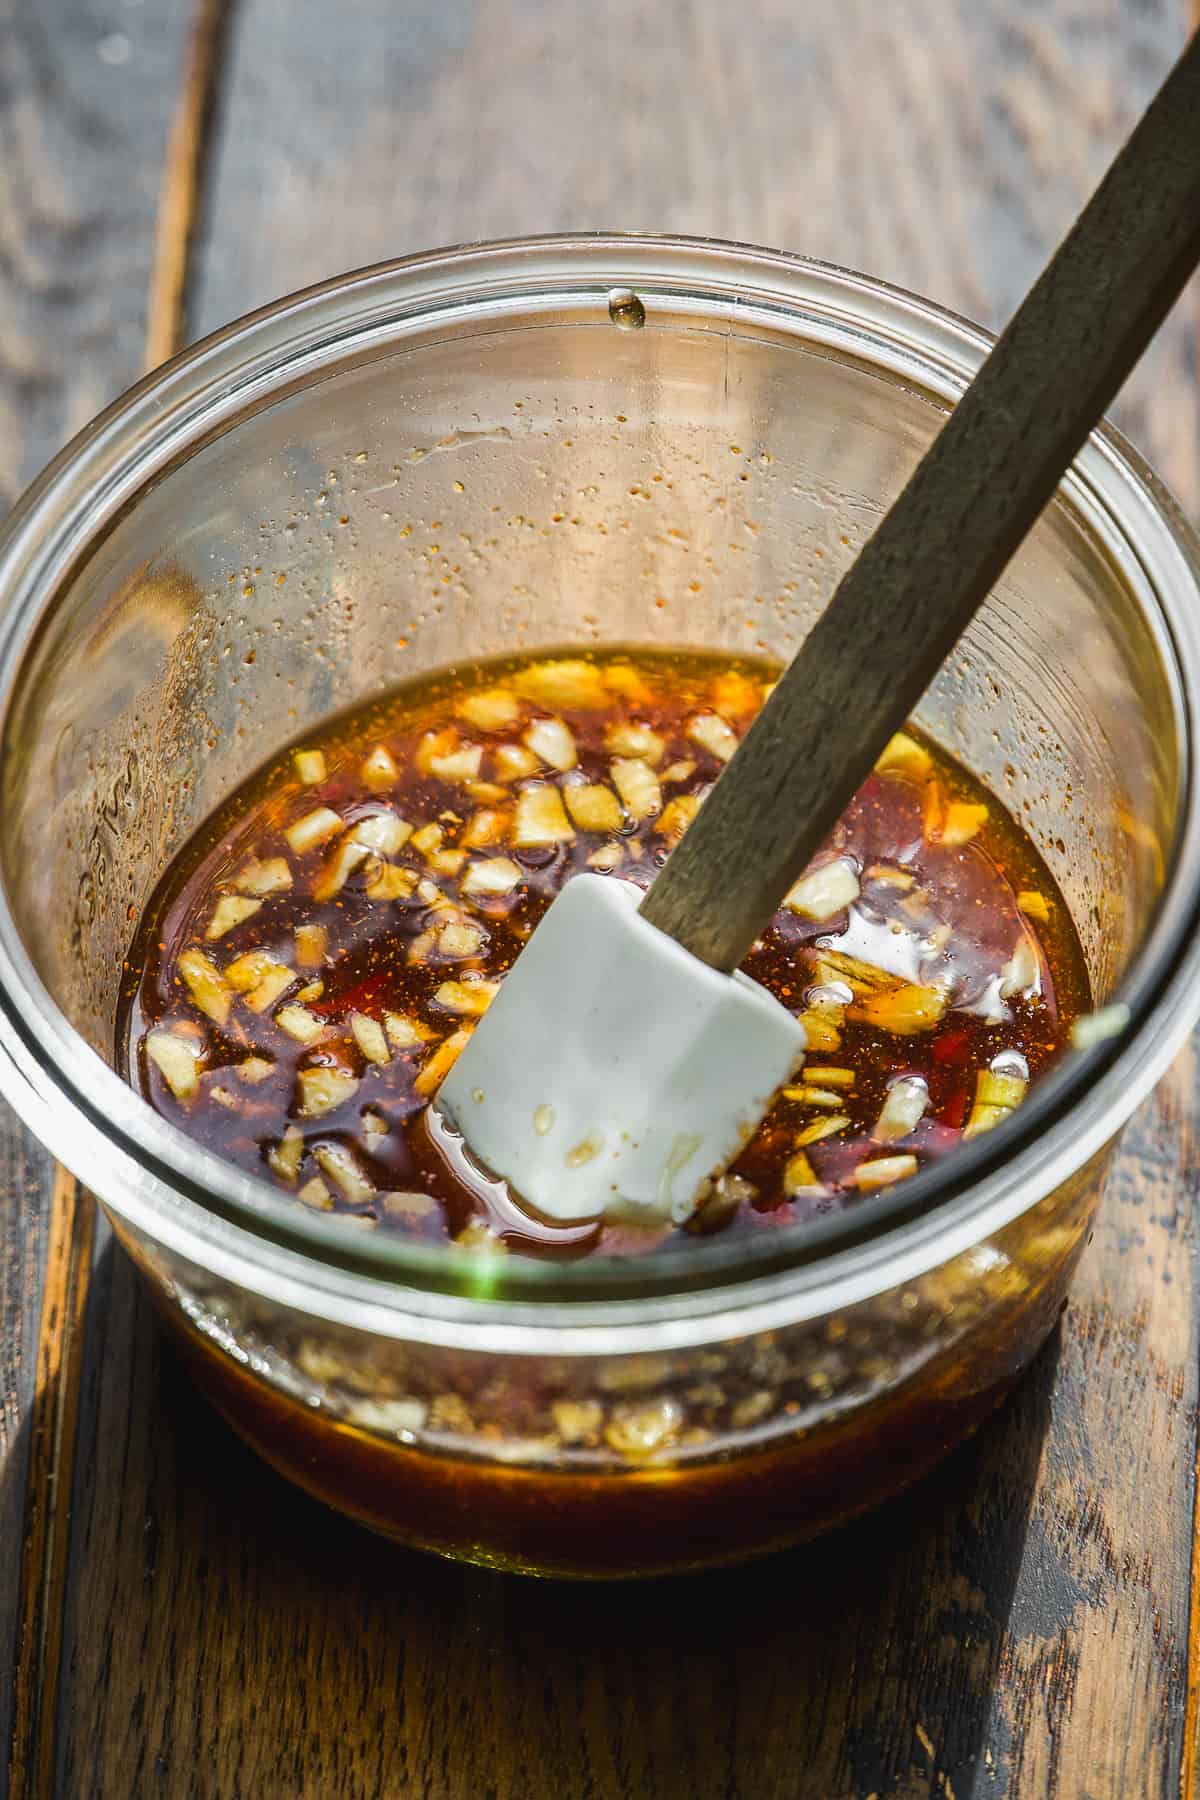 Honey chili sauce in a glass jar.